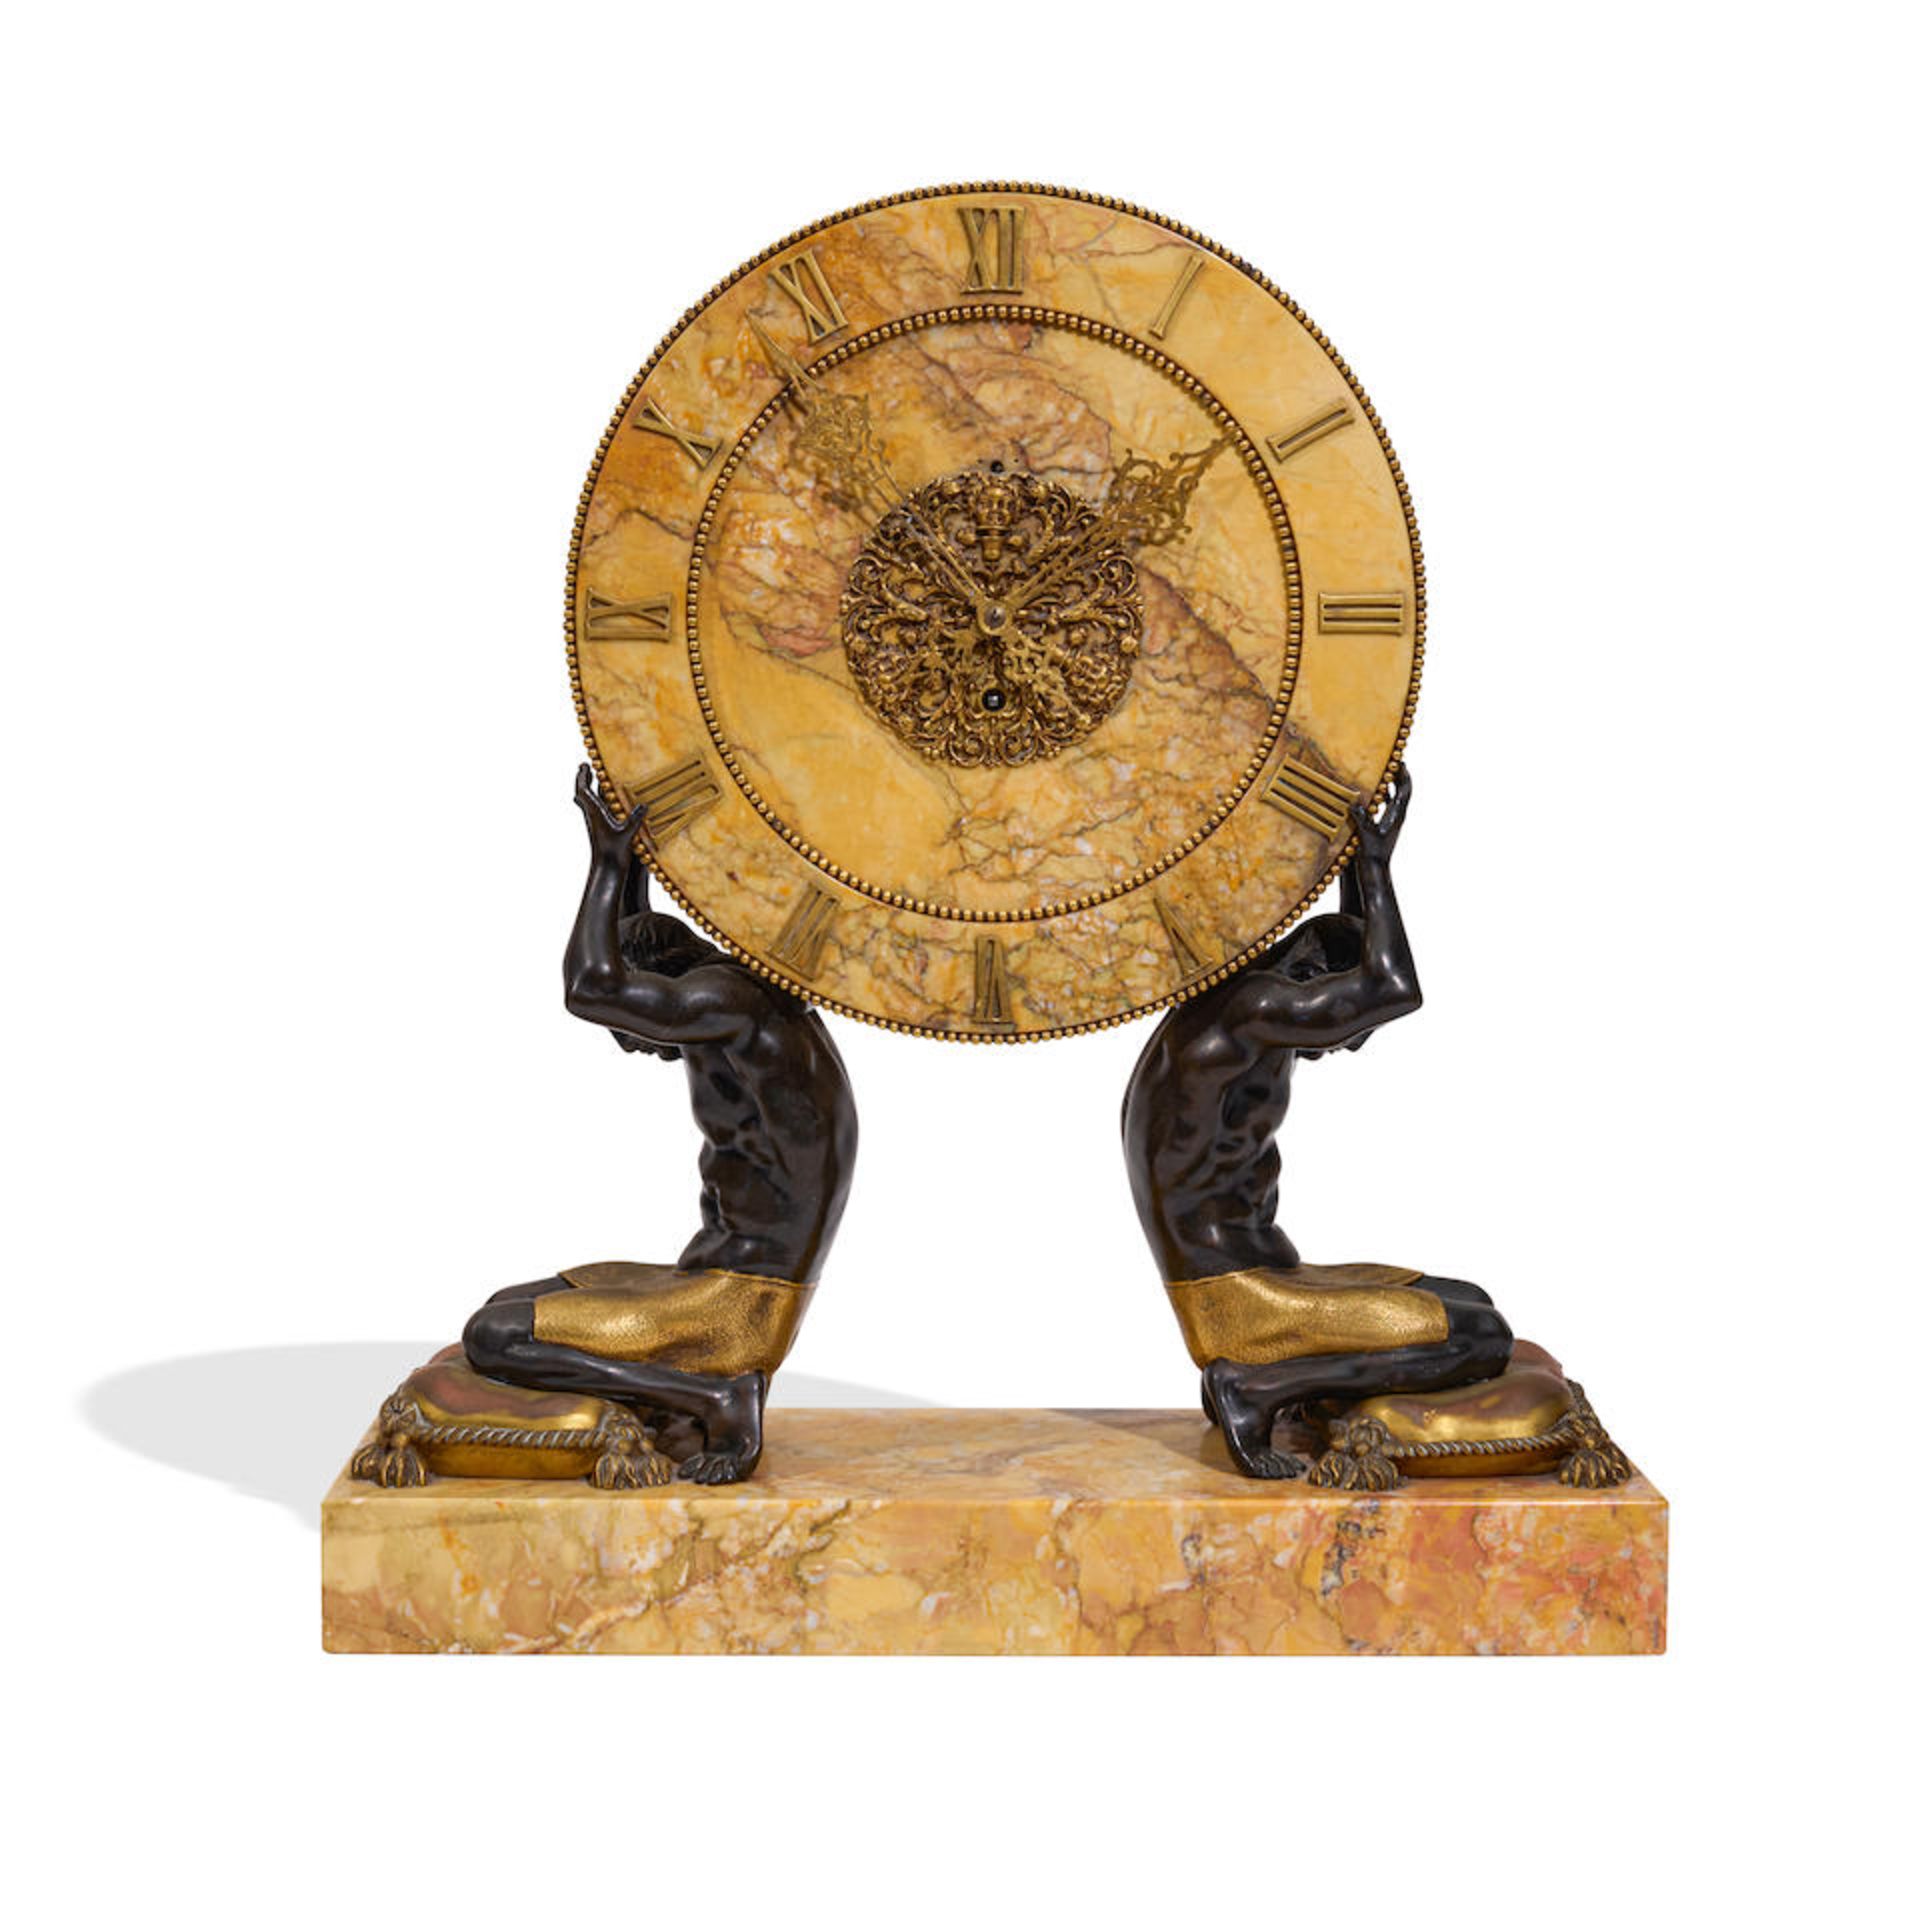 AN AMERICAN GILT AND PATINATED BRONZE AND SIENNA MARBLE FIGURAL MANTEL CLOCKEarly 20th century